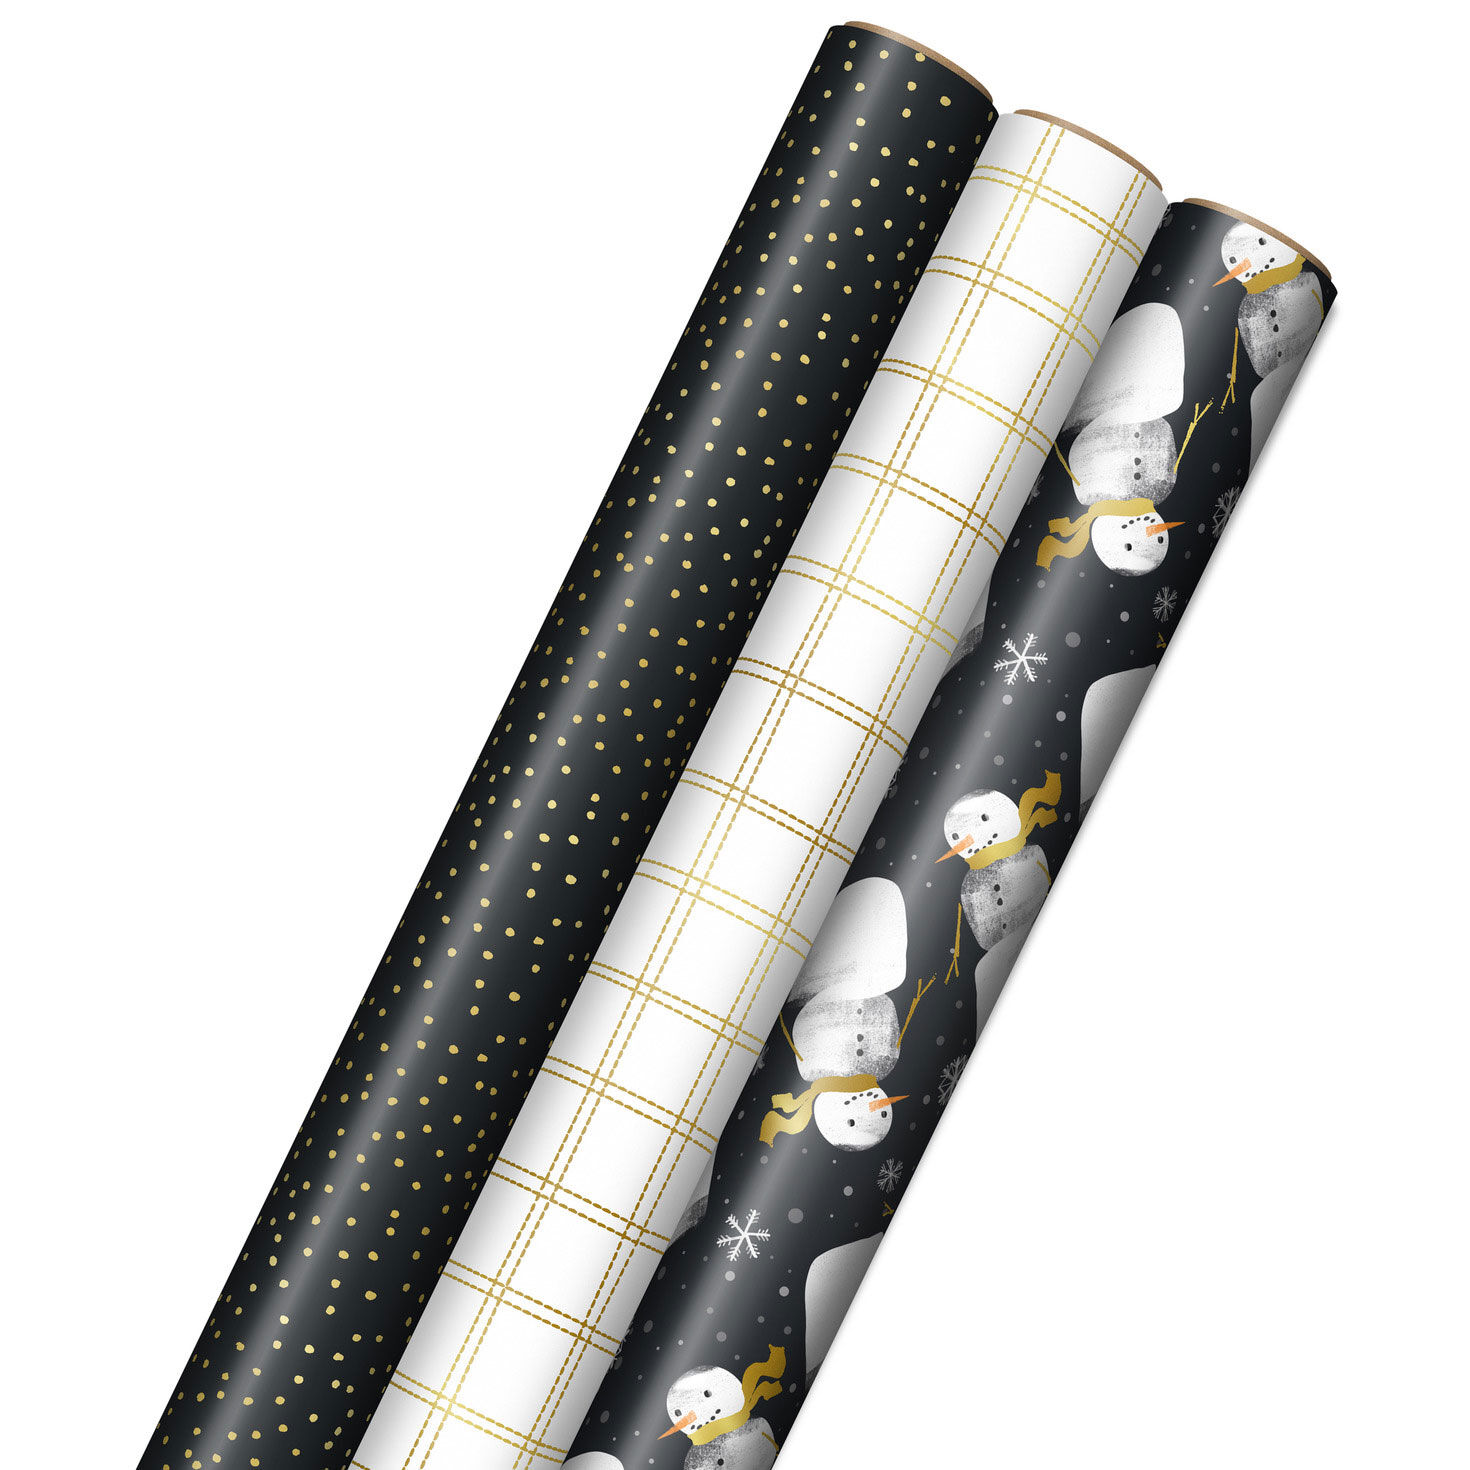 12 Days Of Christmas Holiday Wrapping Paper Rolls 3 Pack - World